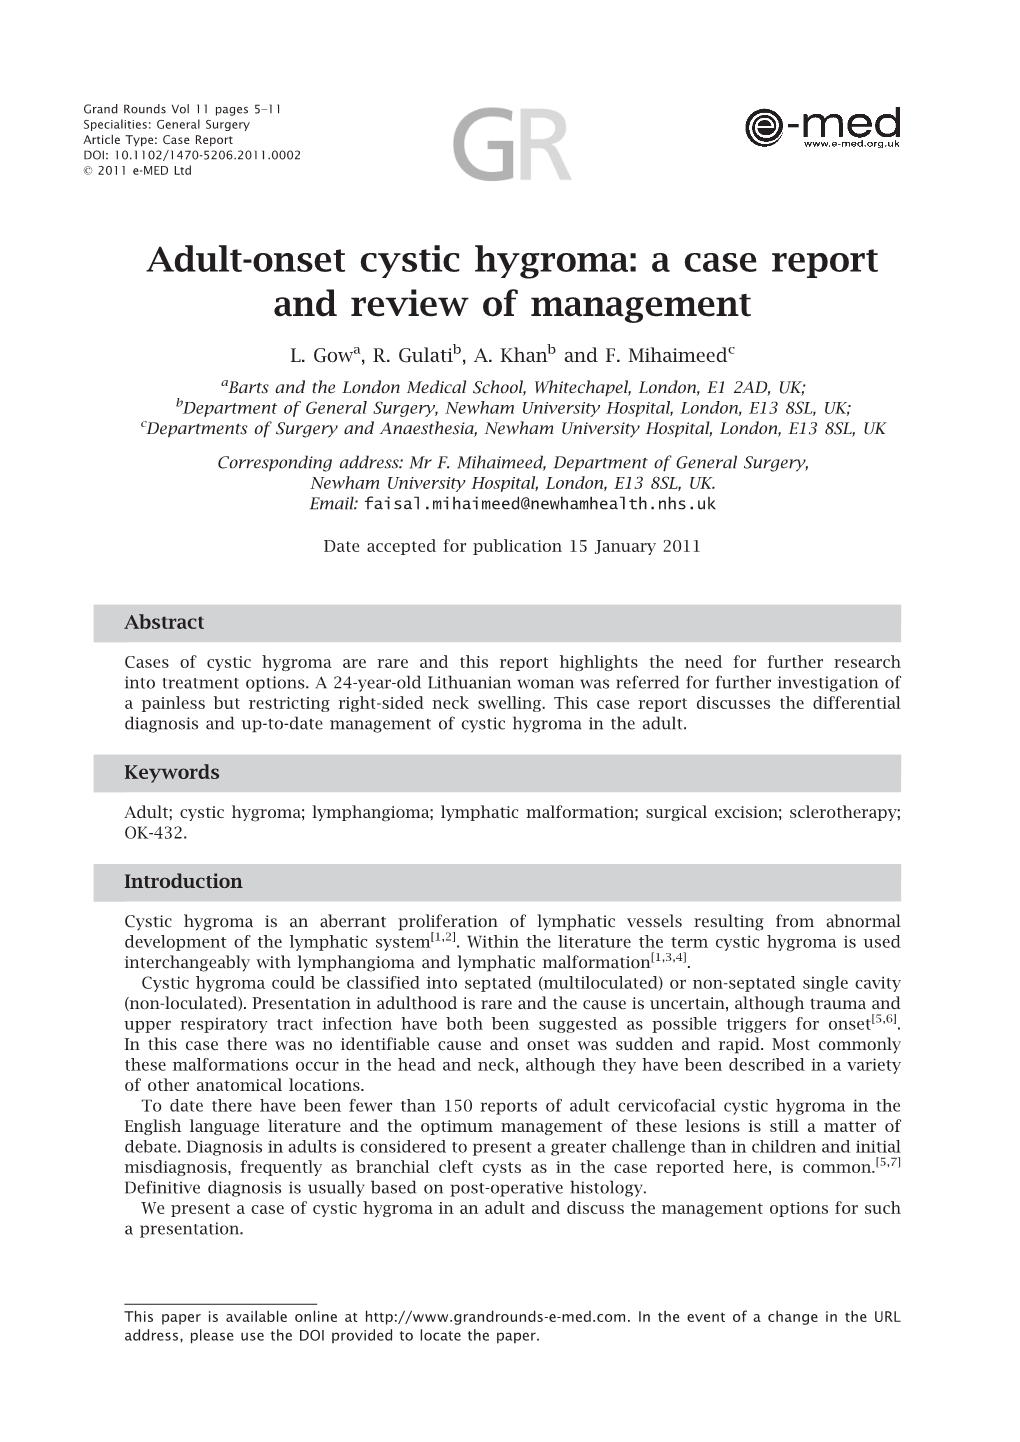 Adult-Onset Cystic Hygroma: a Case Report and Review of Management